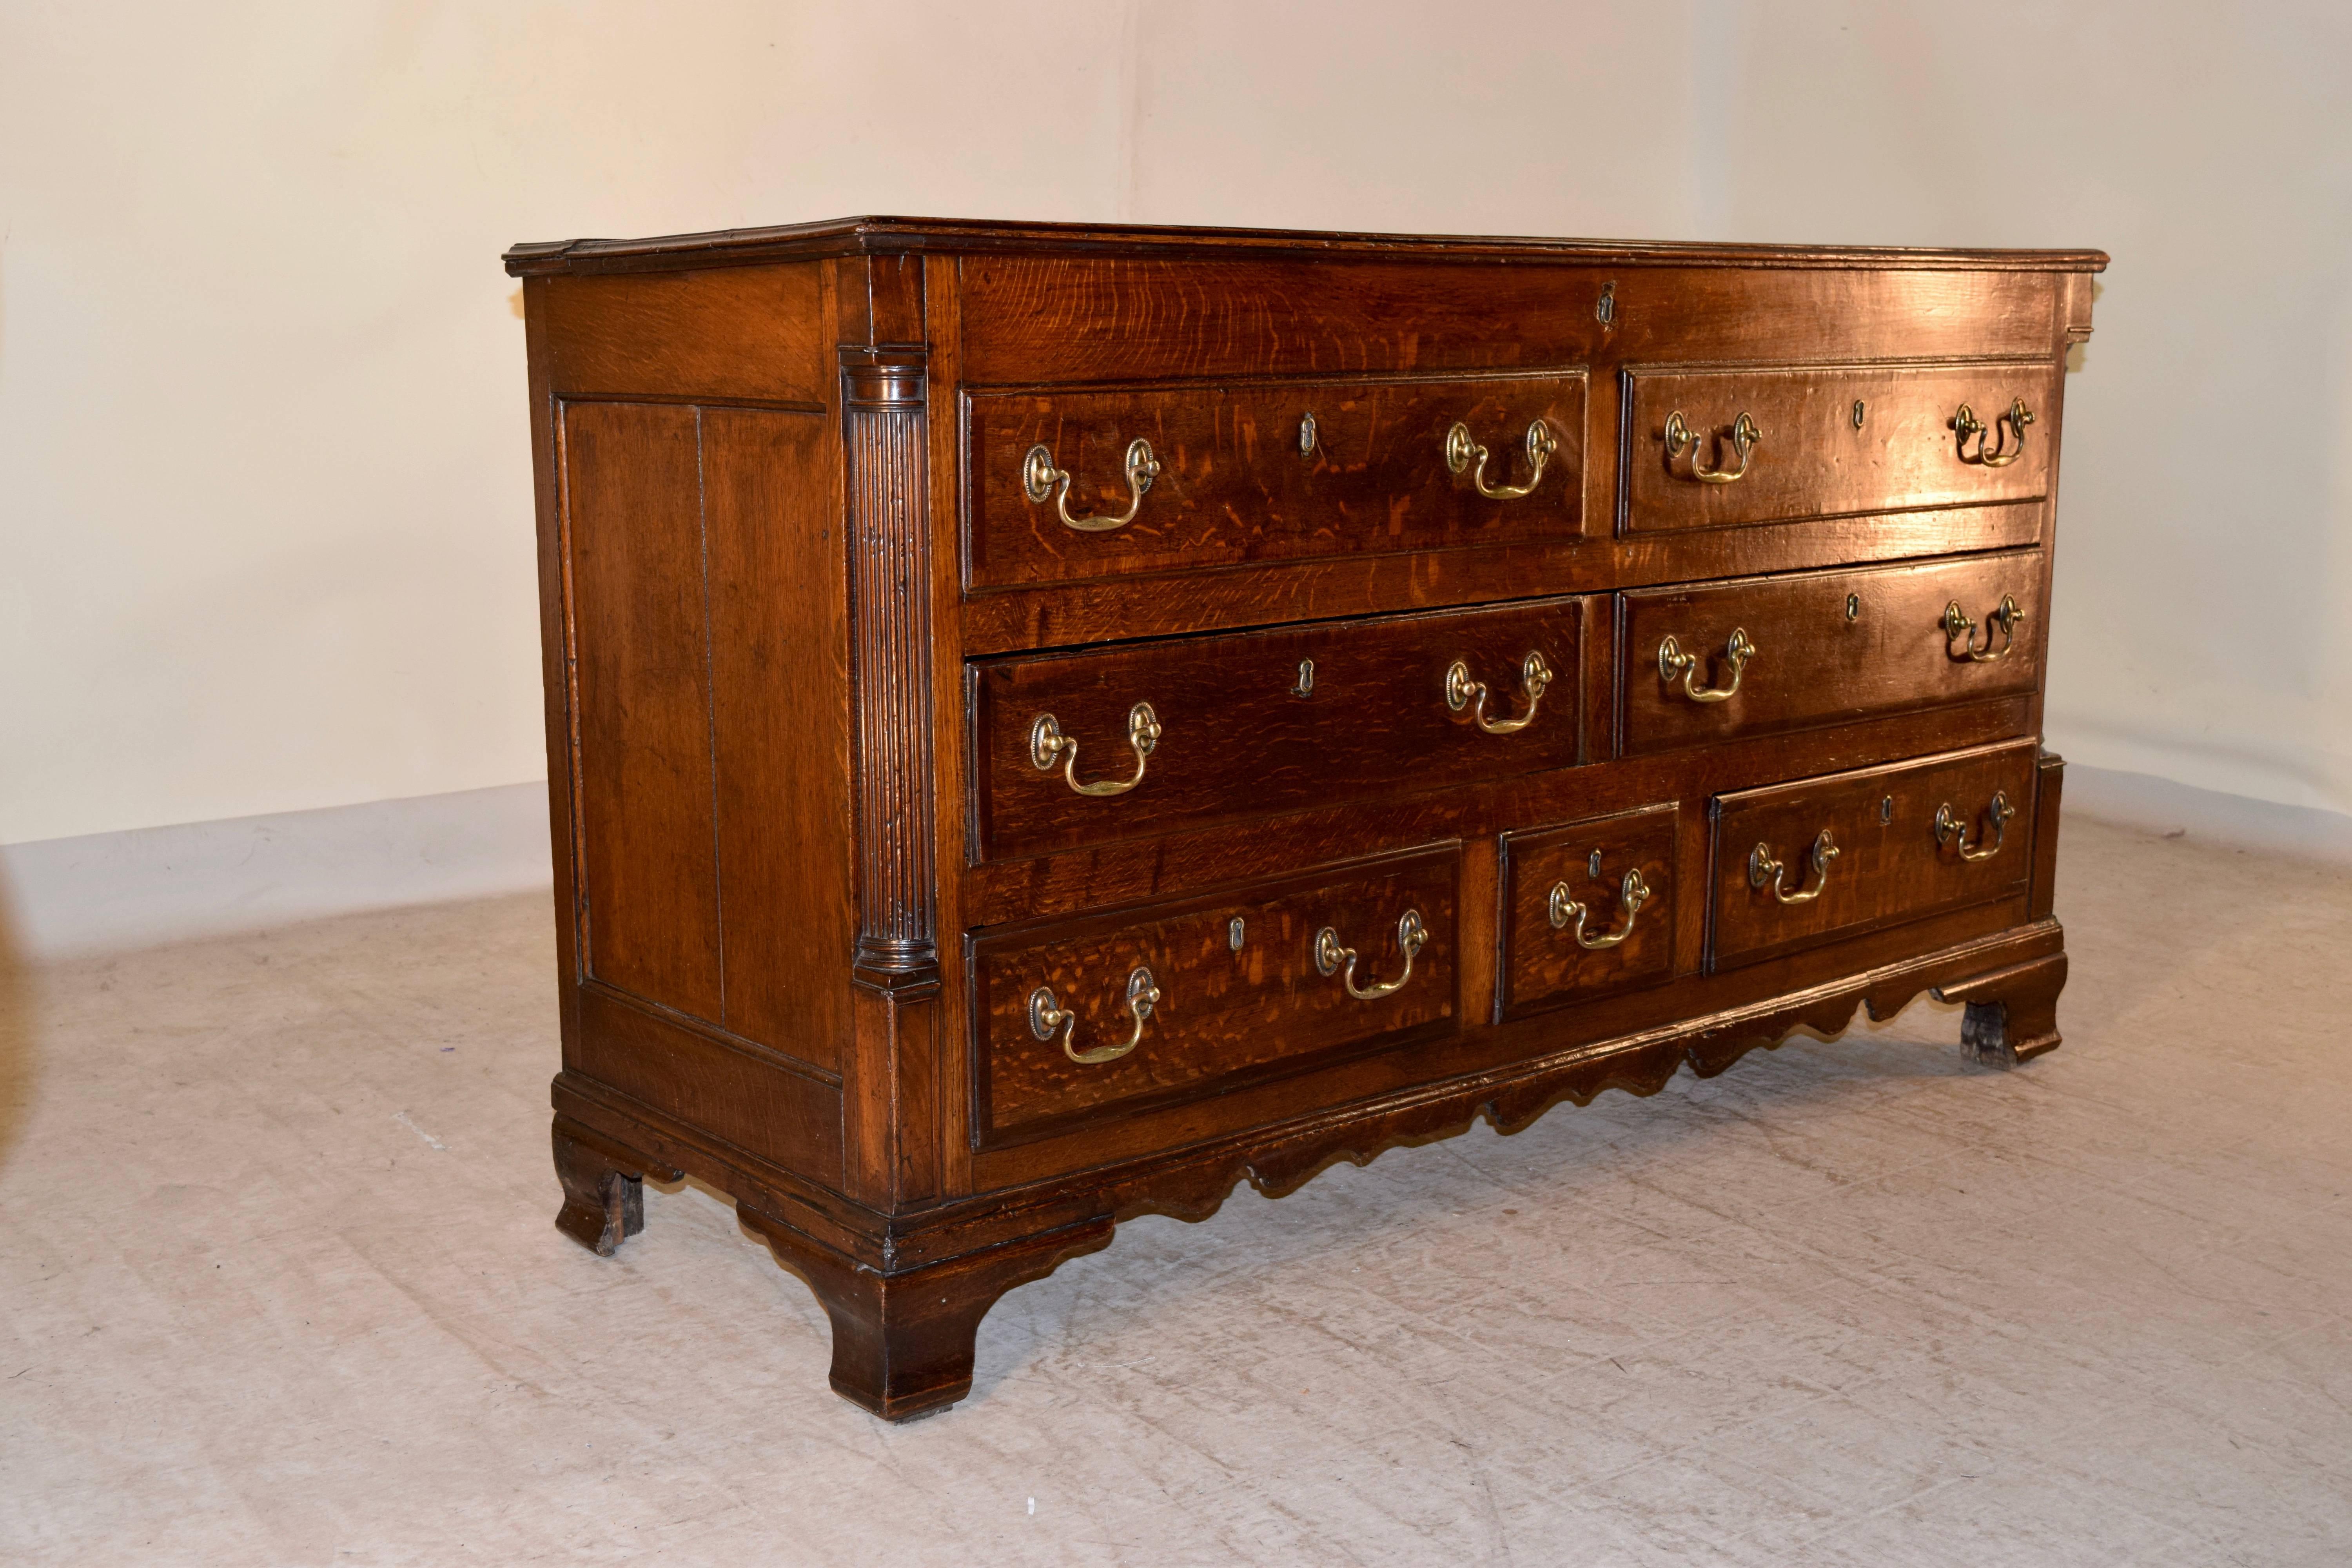 Early 19th century Lancashire mule chest which has been converted to be a chest of drawers with a lift top. The top and drawer fronts are banded in mahogany and the top has a molded edge. There are seven drawers in the case, flanked by fluted column